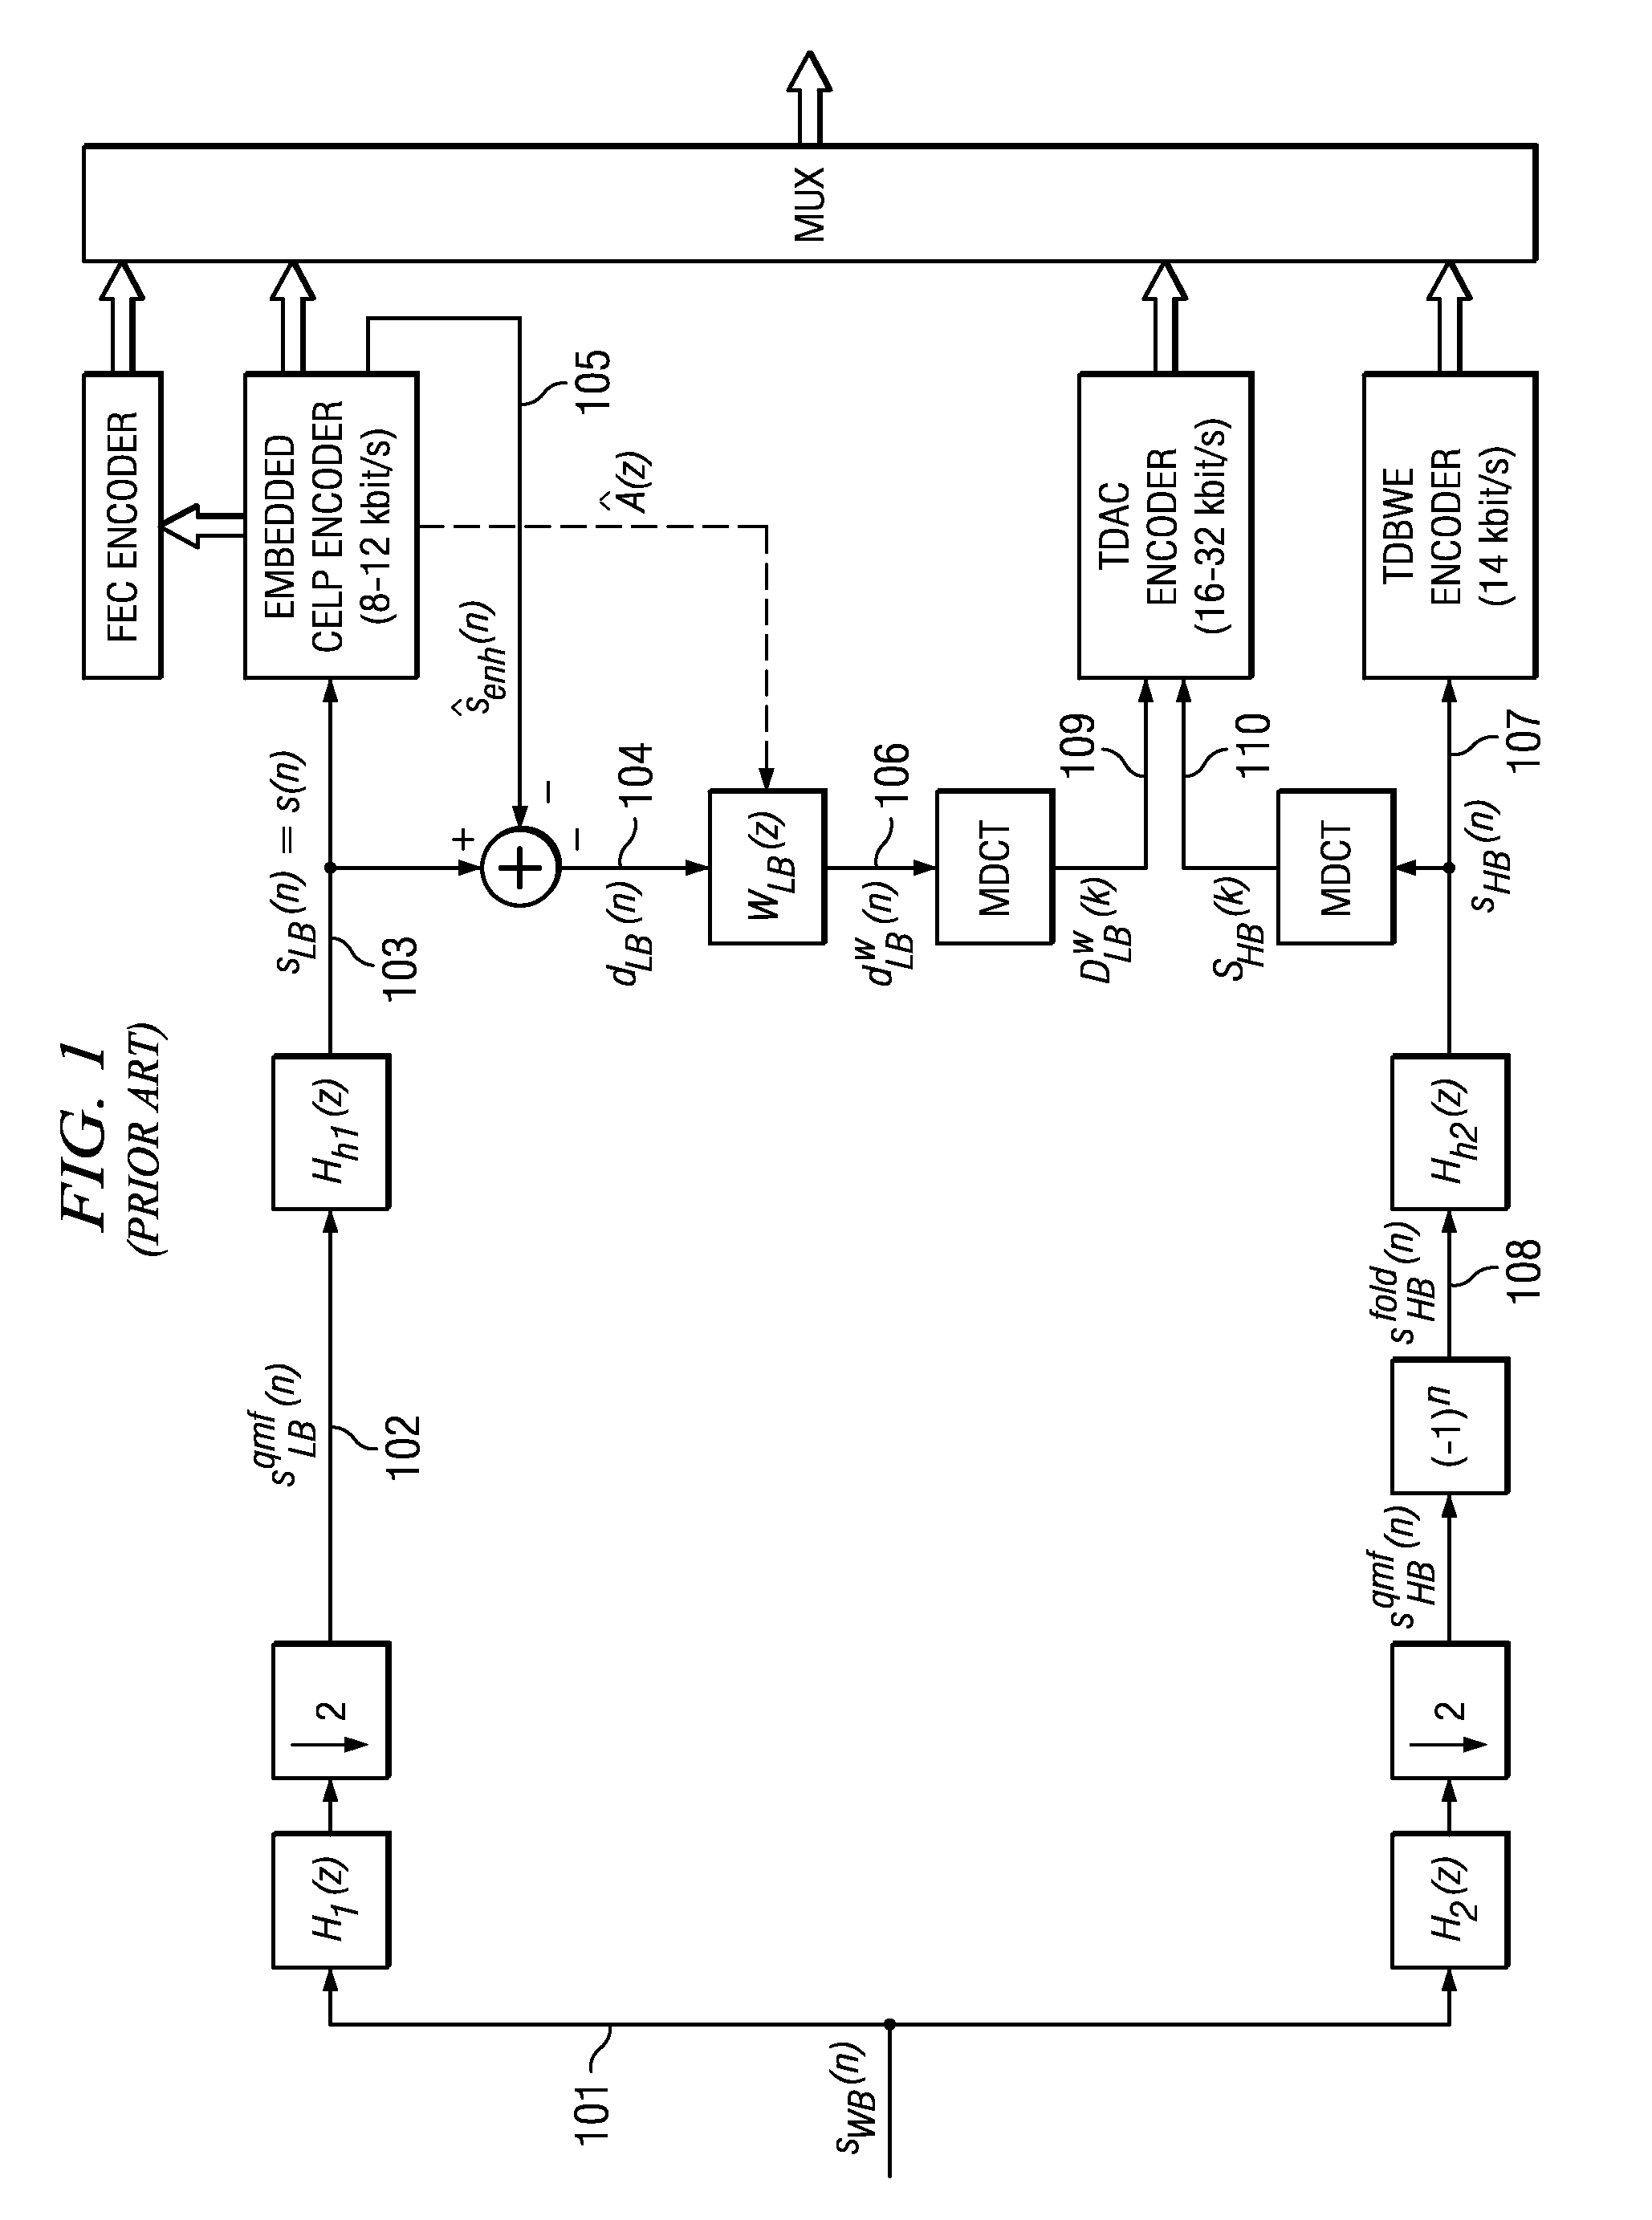 Adaptive frequency prediction for encoding or decoding an audio signal